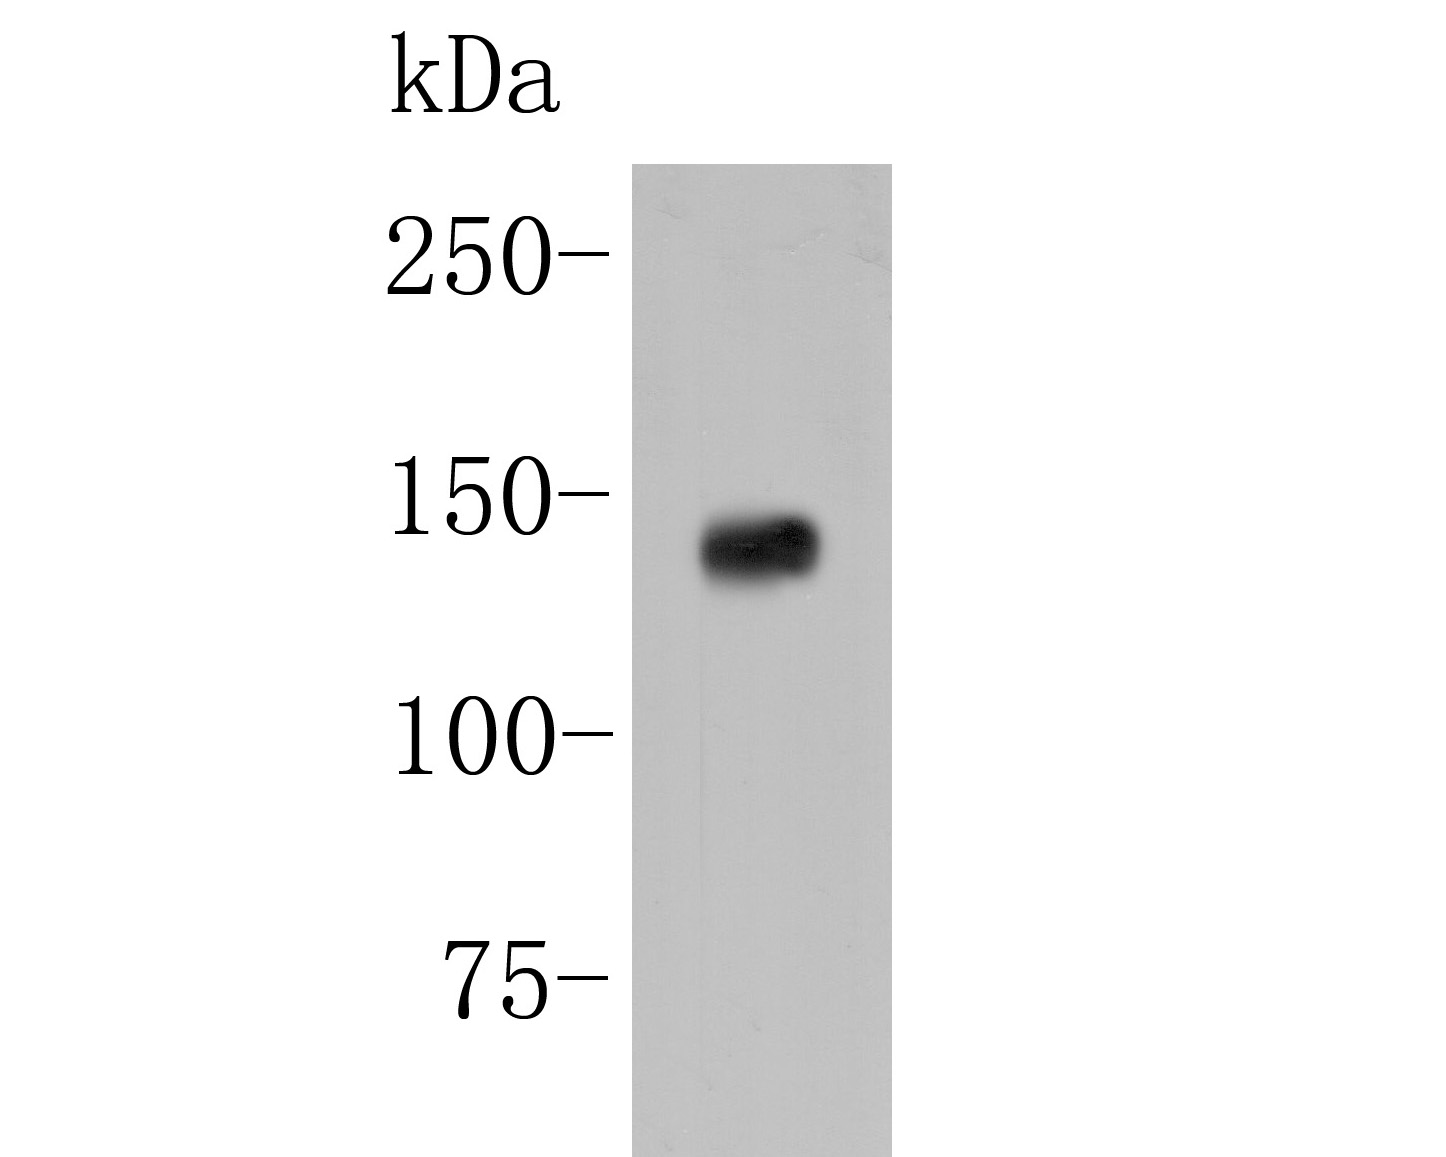 Western blot analysis of IRS1 on rat brain tissue lysate. Proteins were transferred to a PVDF membrane and blocked with 5% BSA in PBS for 1 hour at room temperature. The primary antibody (ER2001-35, 1/500) was used in 5% BSA at room temperature for 2 hours. Goat Anti-Rabbit IgG - HRP Secondary Antibody (HA1001) at 1:5,000 dilution was used for 1 hour at room temperature.